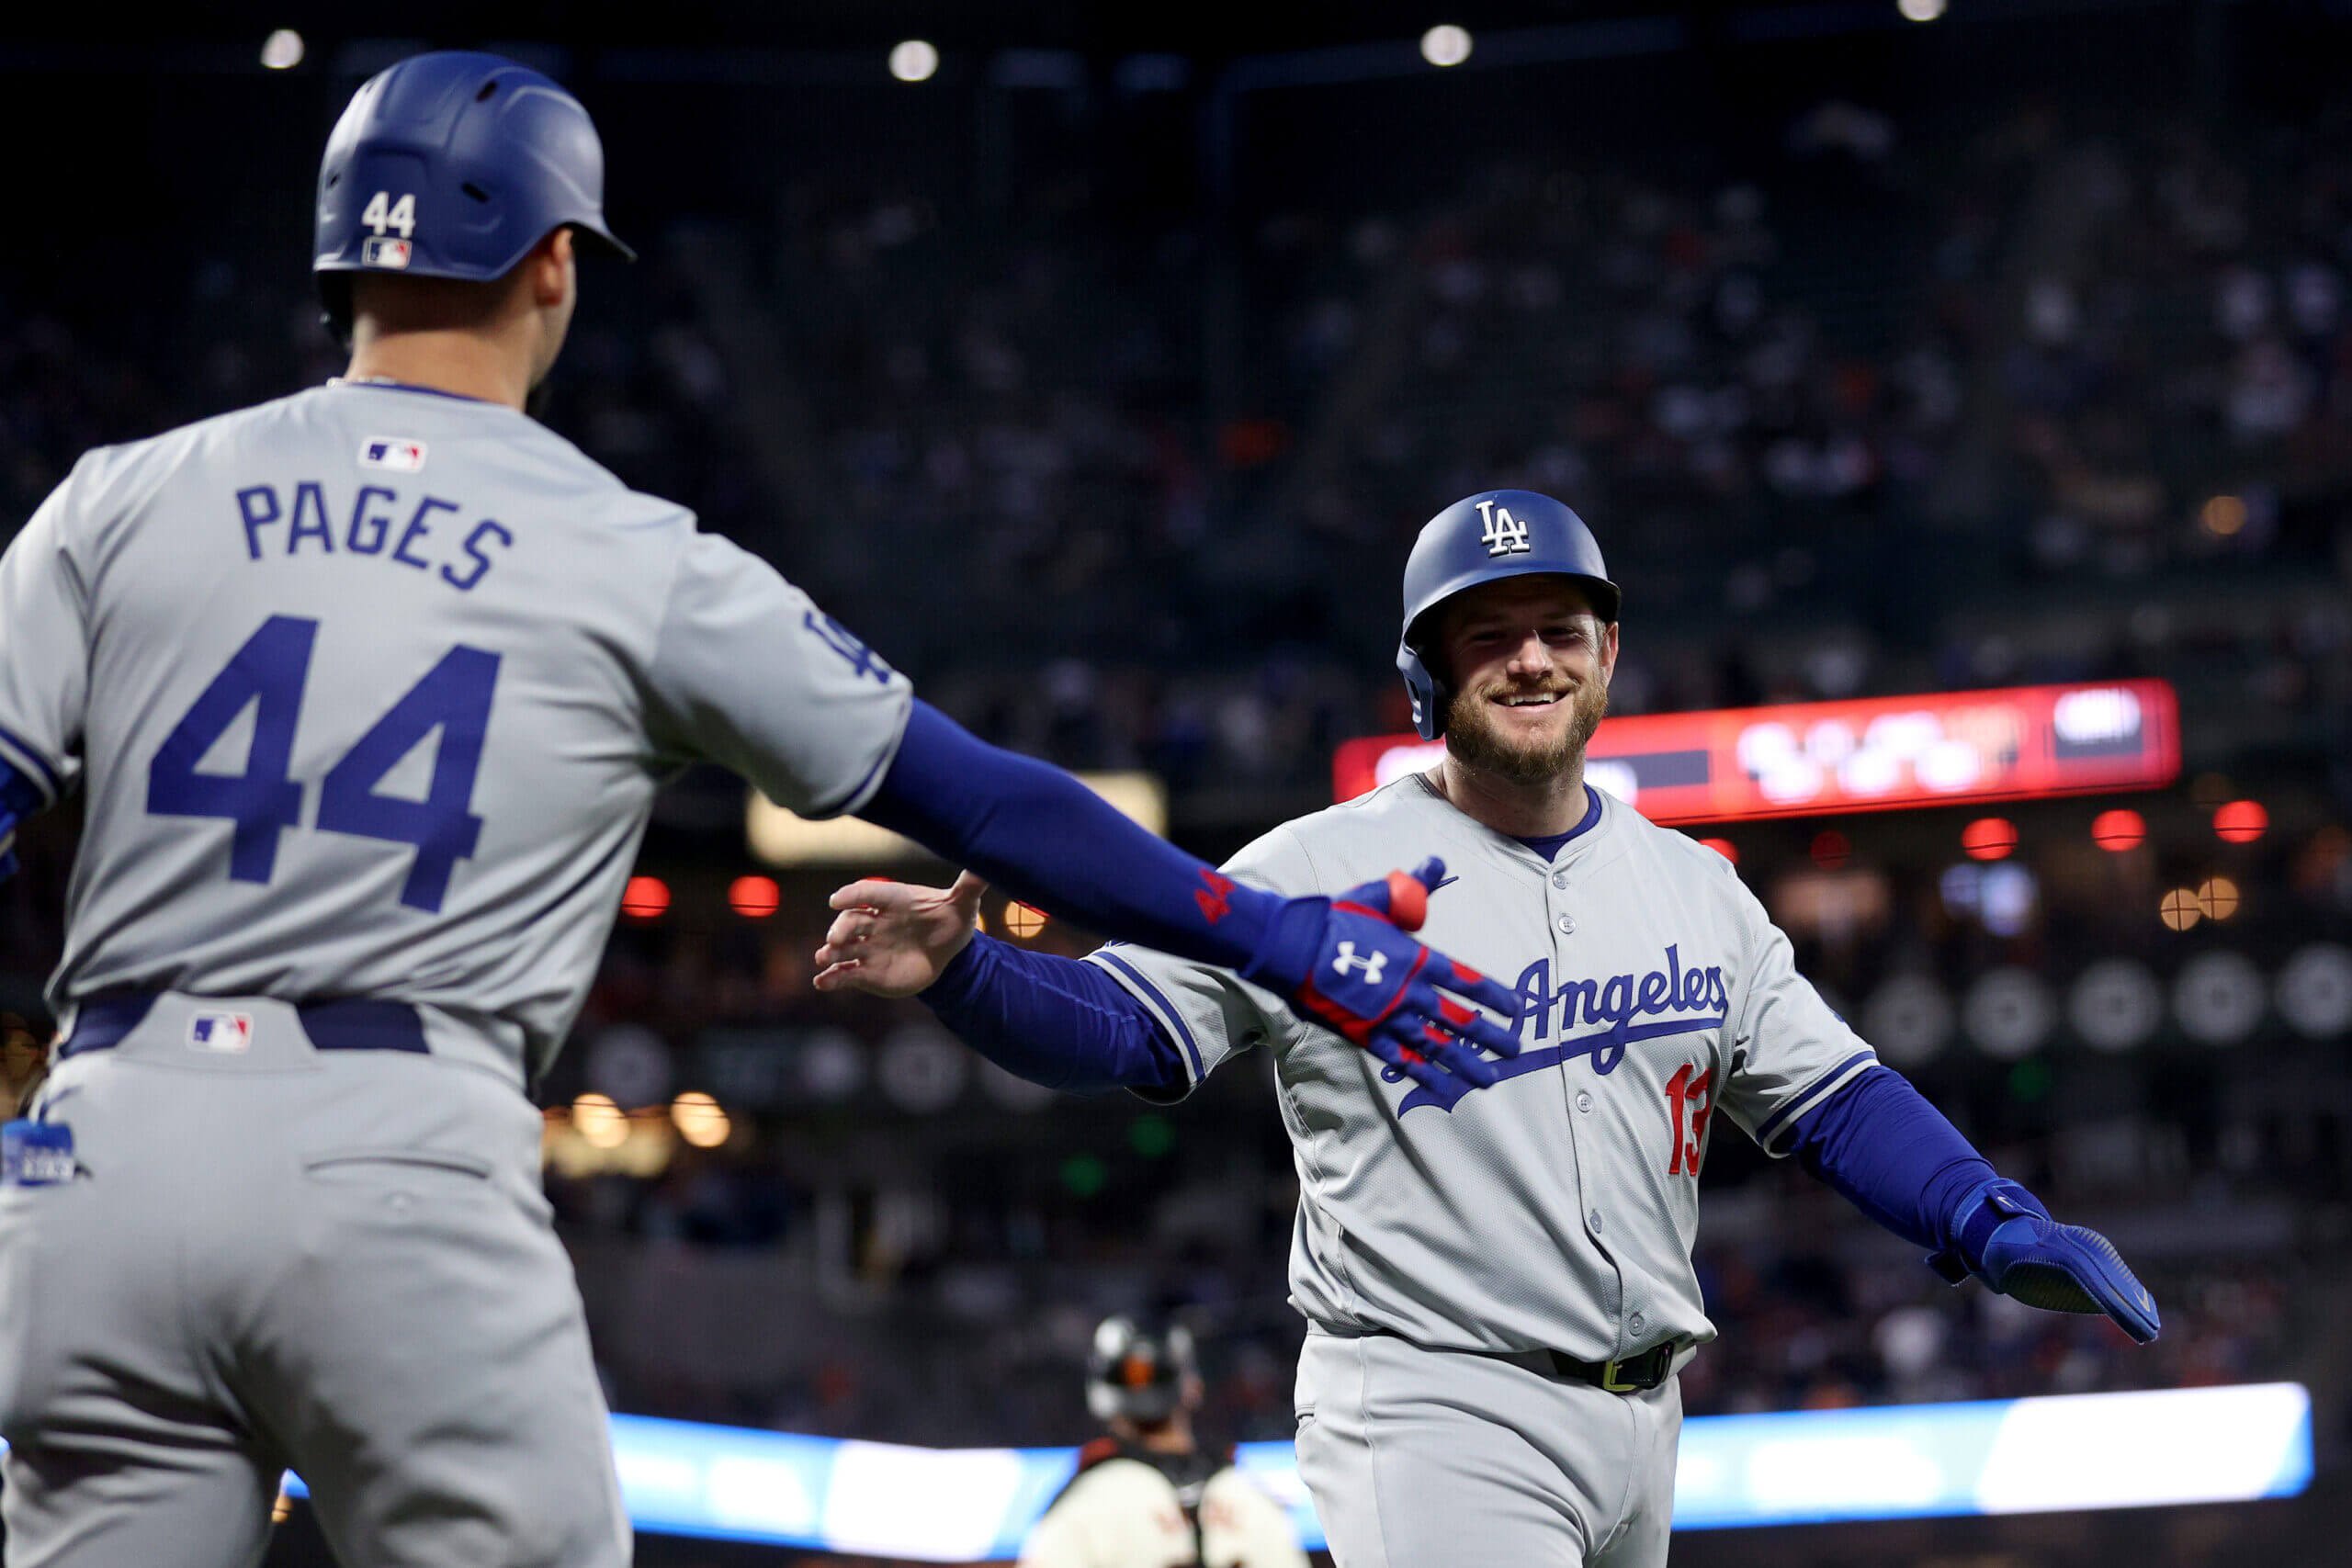 Dodgers place Max Muncy on IL, option James Outman amid flurry of roster moves